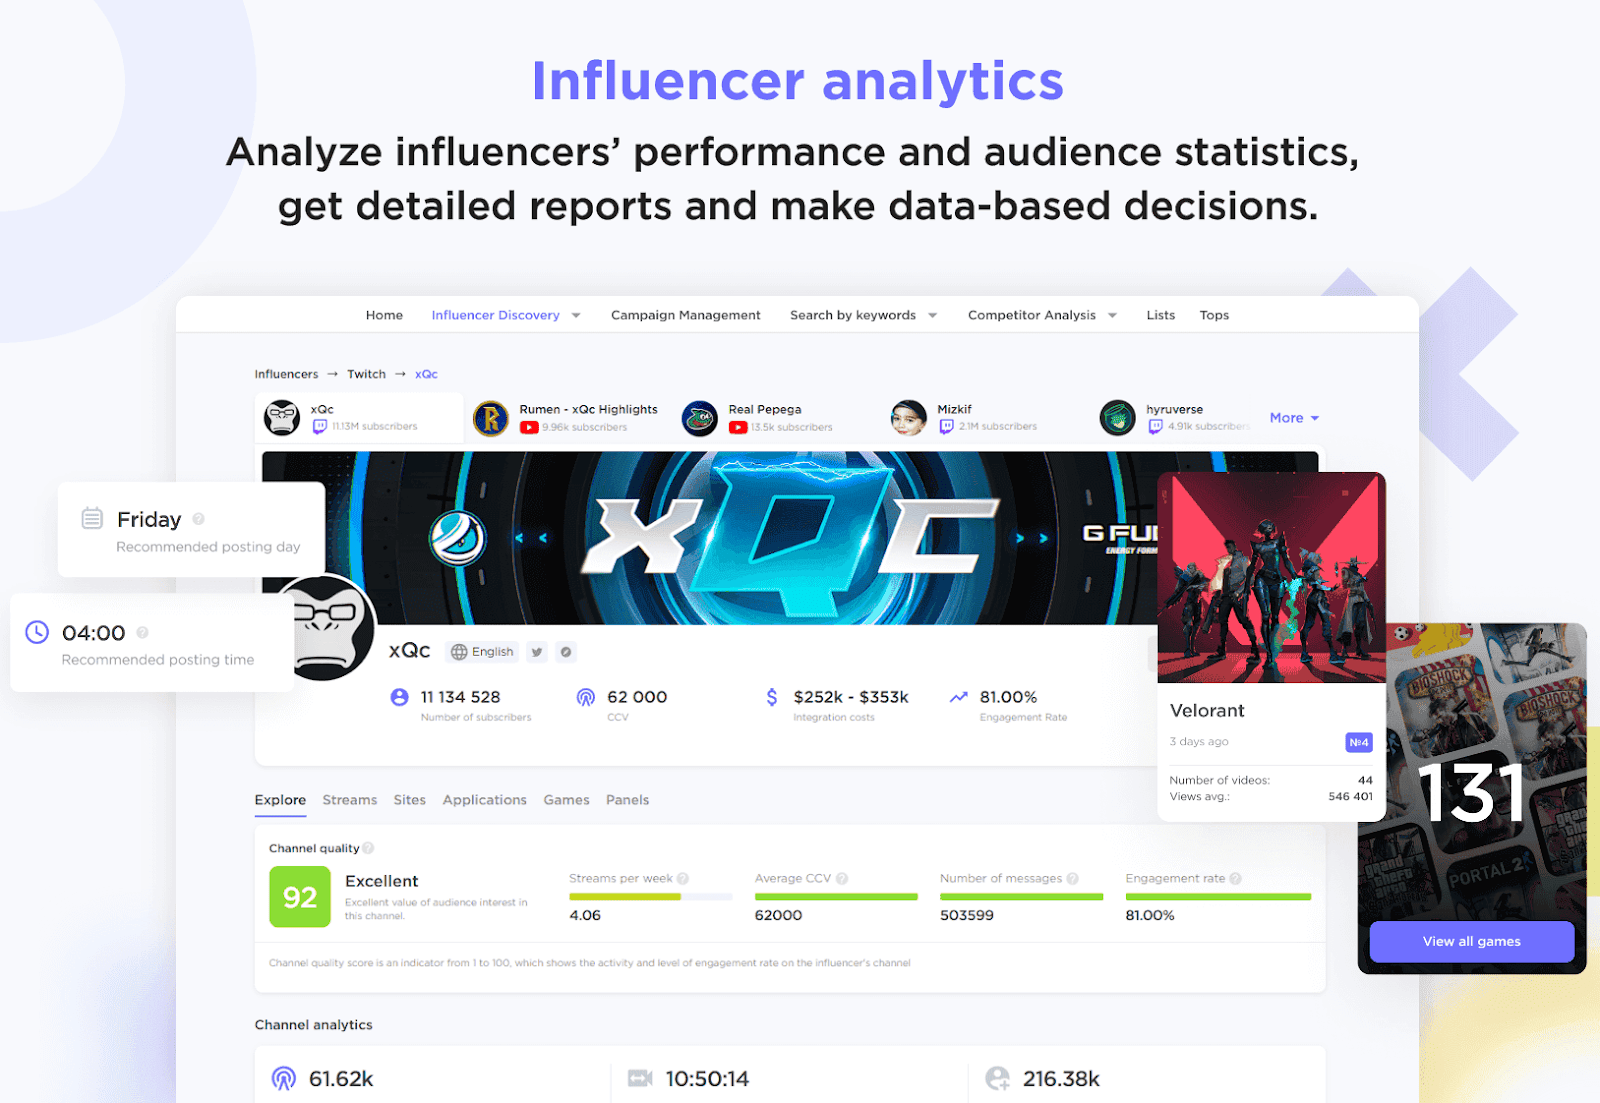 Promo graphic for Influencer Analytics app, featuring a profile report from the "Influencer Discovery" tab.